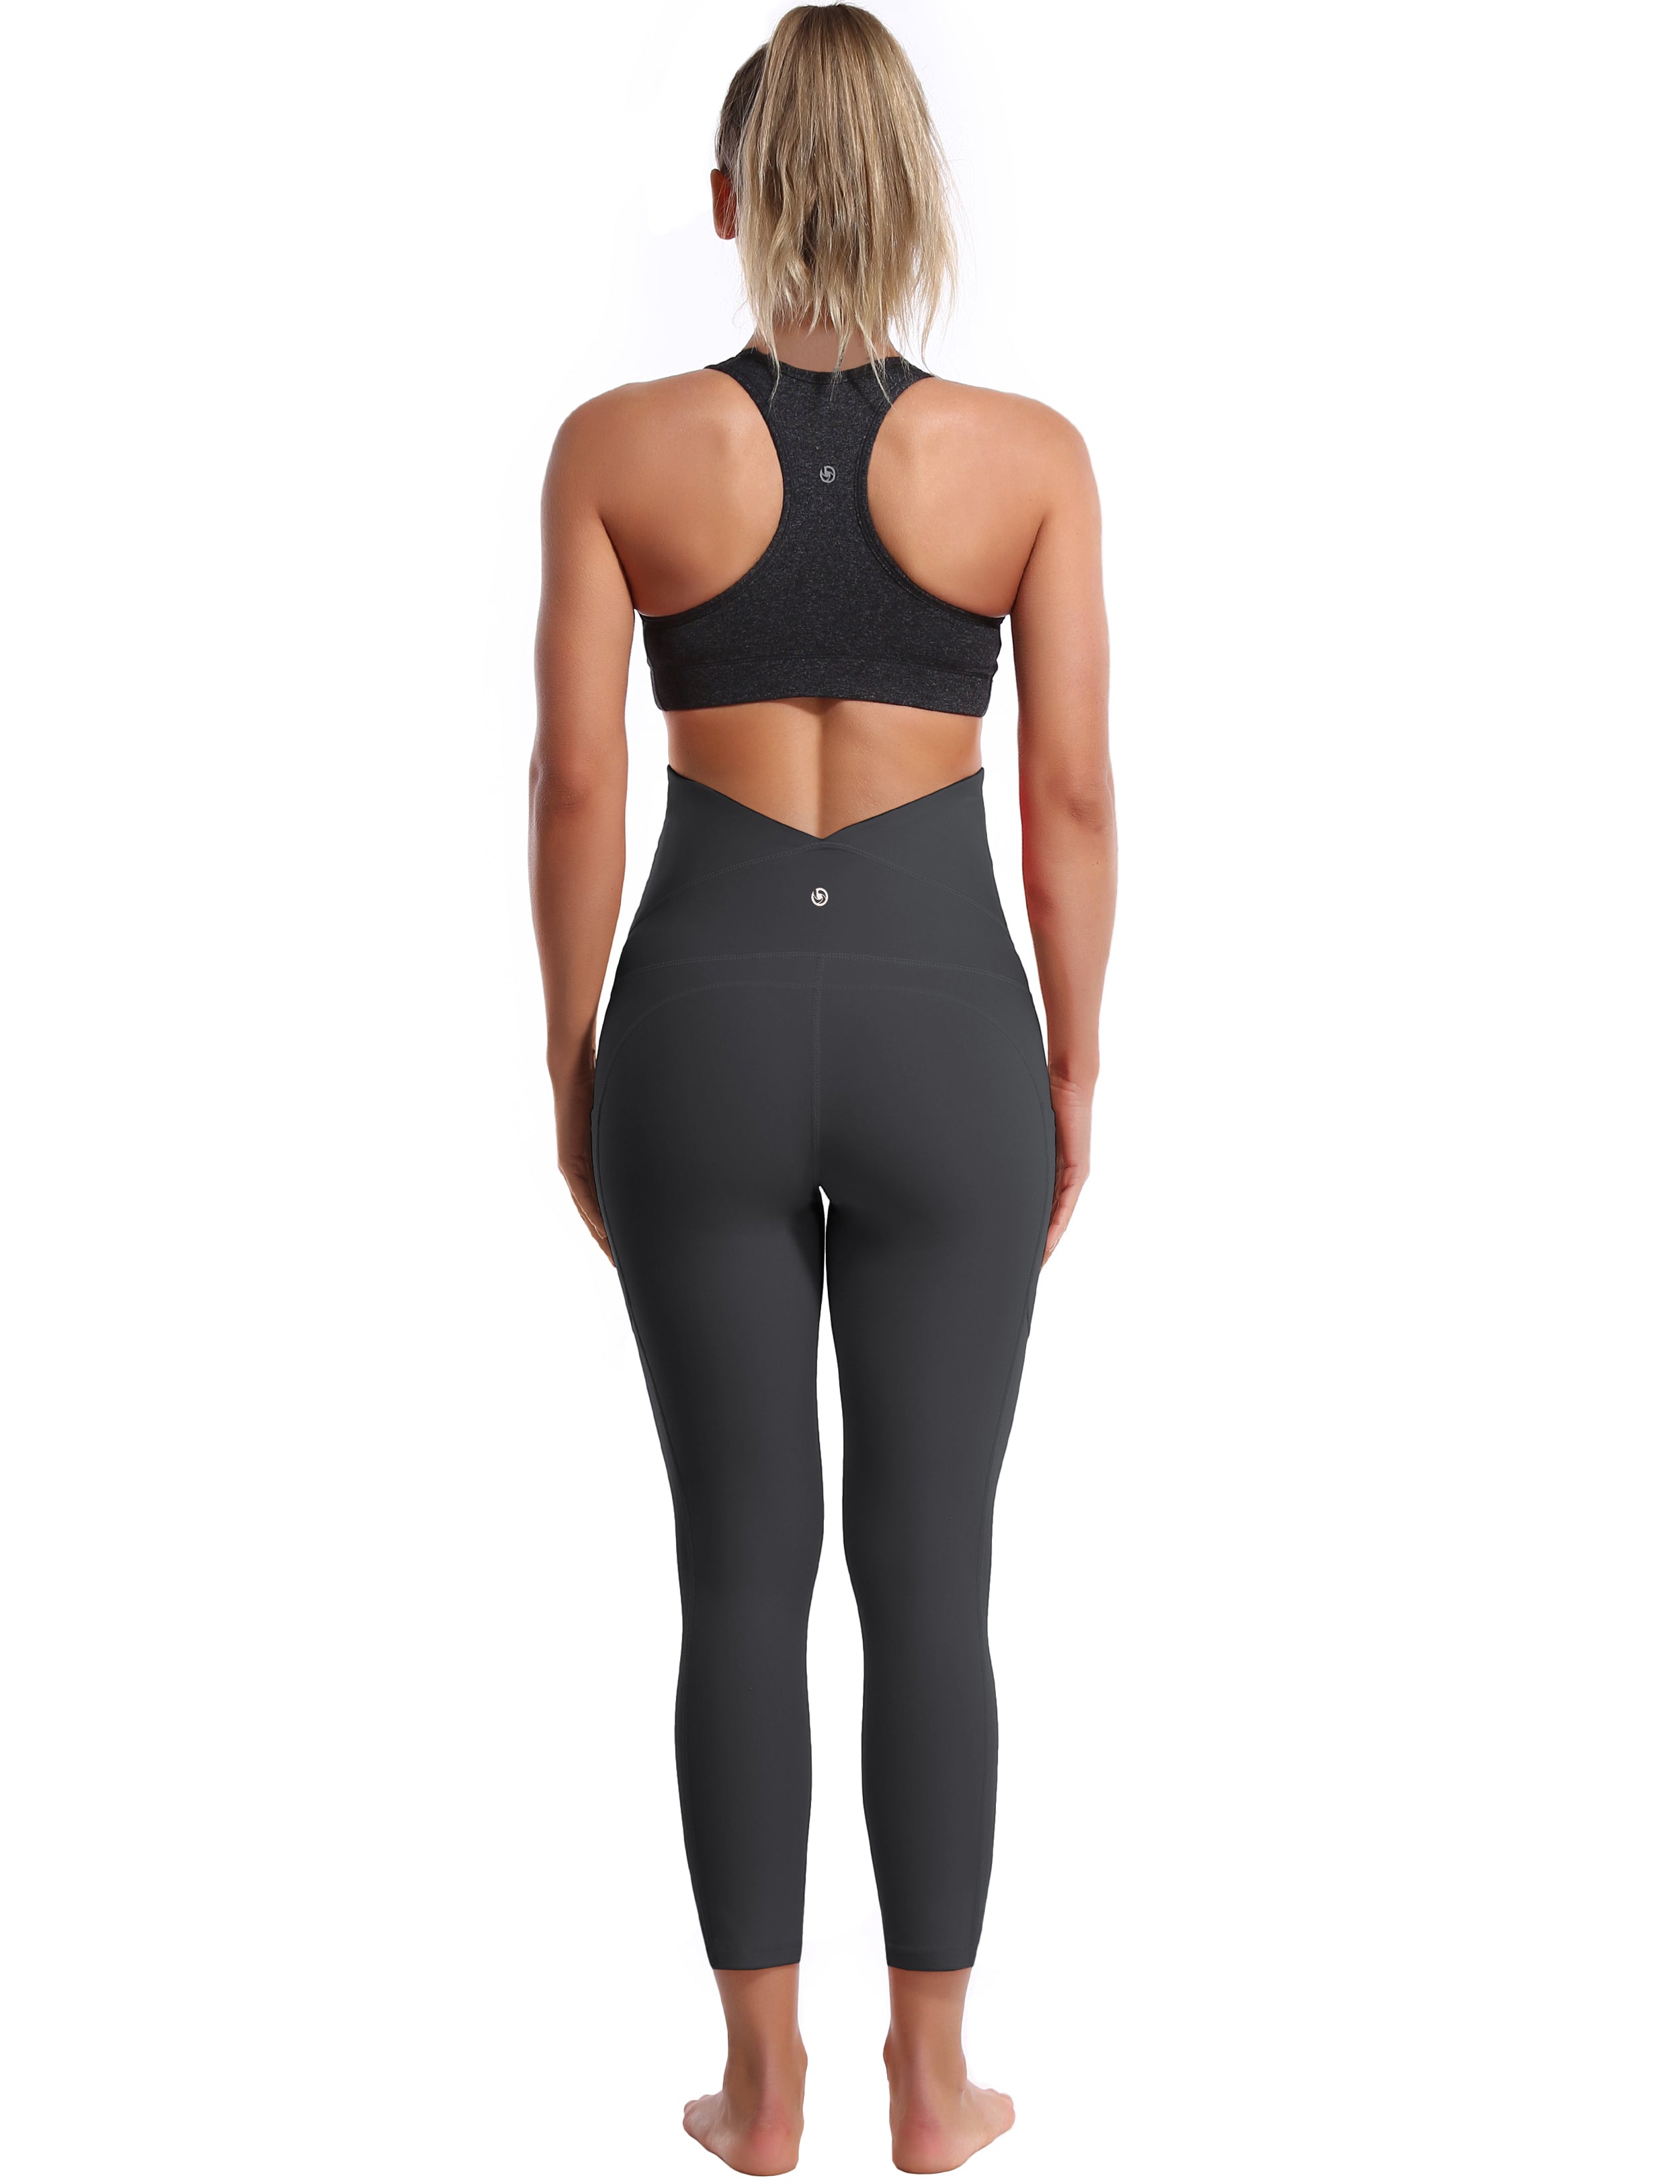 22" Side Pockets Maternity Yoga Pants shadowcharcoal 87%Nylon/13%Spandex Softest-ever fabric High elasticity 4-way stretch Fabric doesn't attract lint easily No see-through Moisture-wicking Machine wash